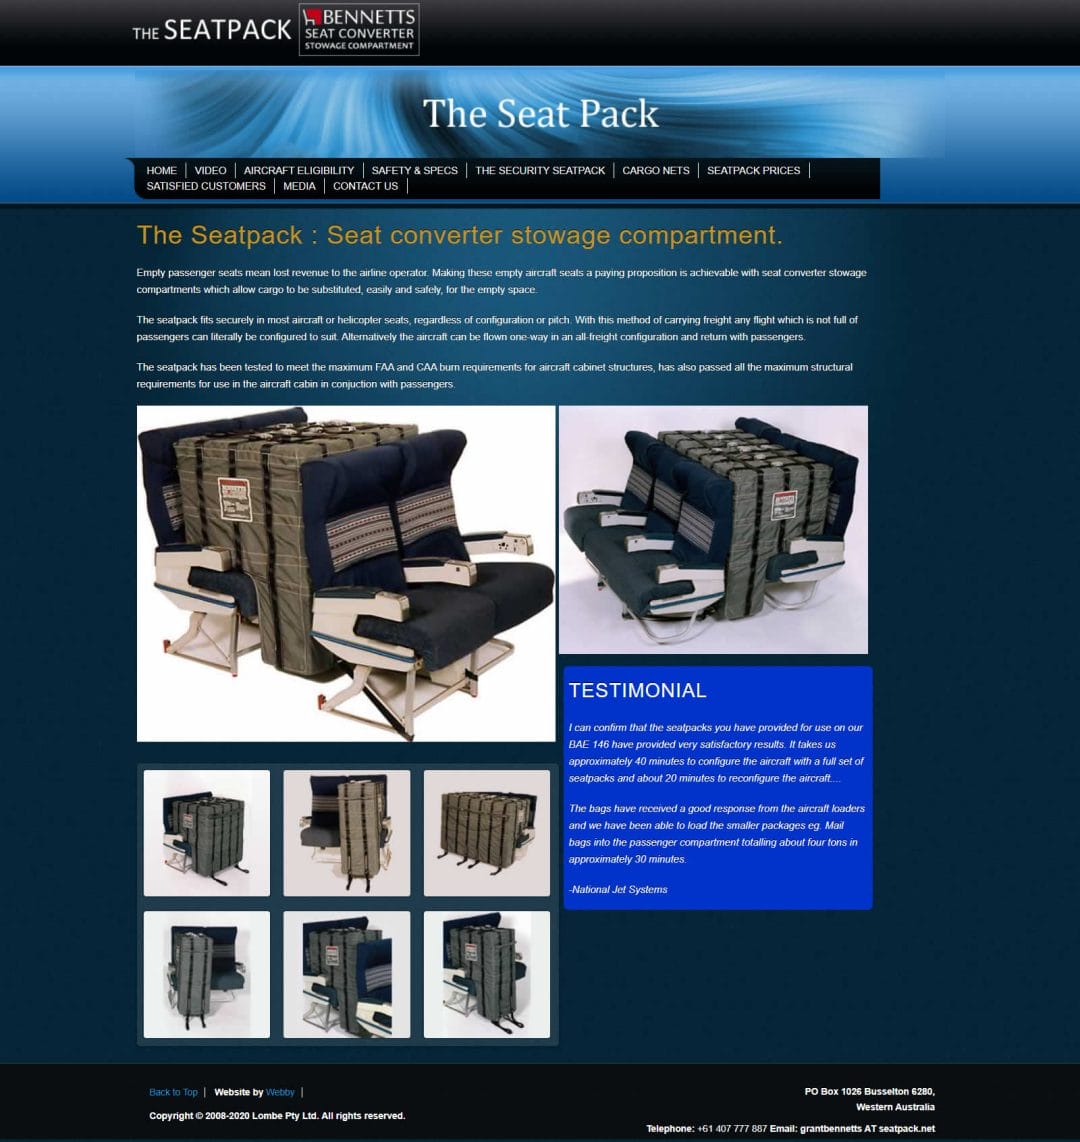 The Seat Pack